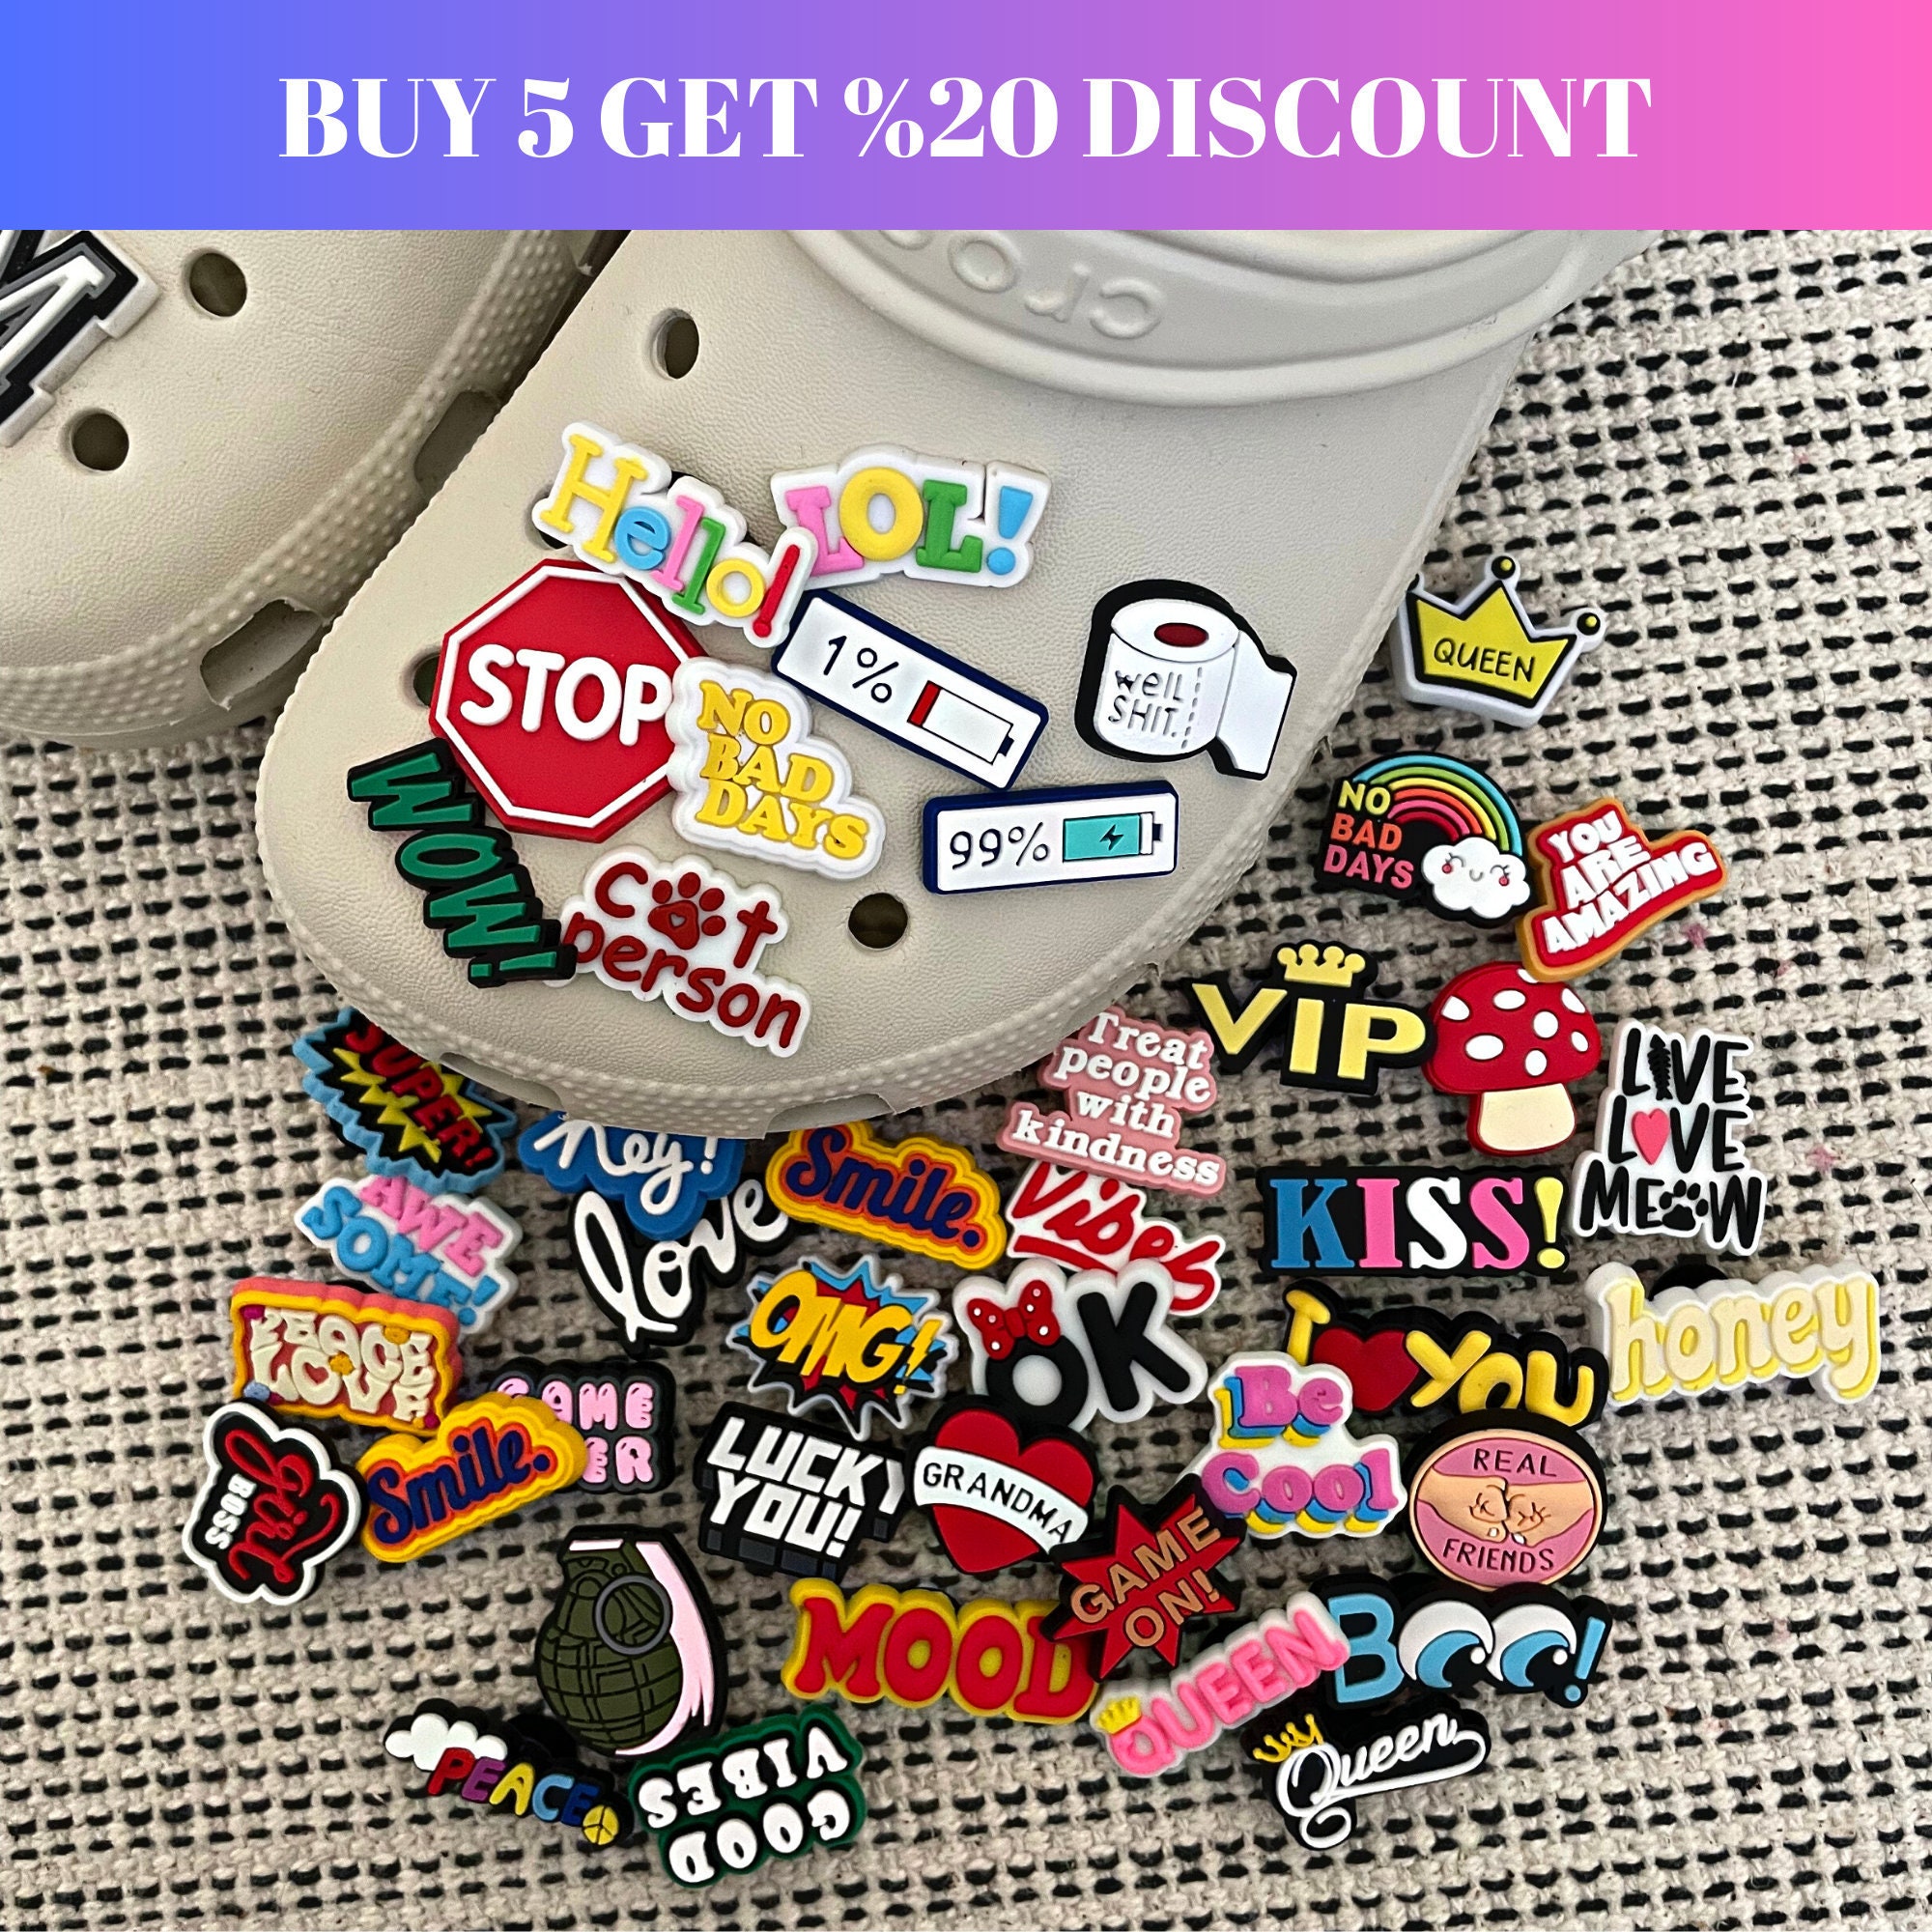 CUSTOMIZABLE Letters Shoe Charms PERSONALIZED WORDS For Crocs Rubber Charm